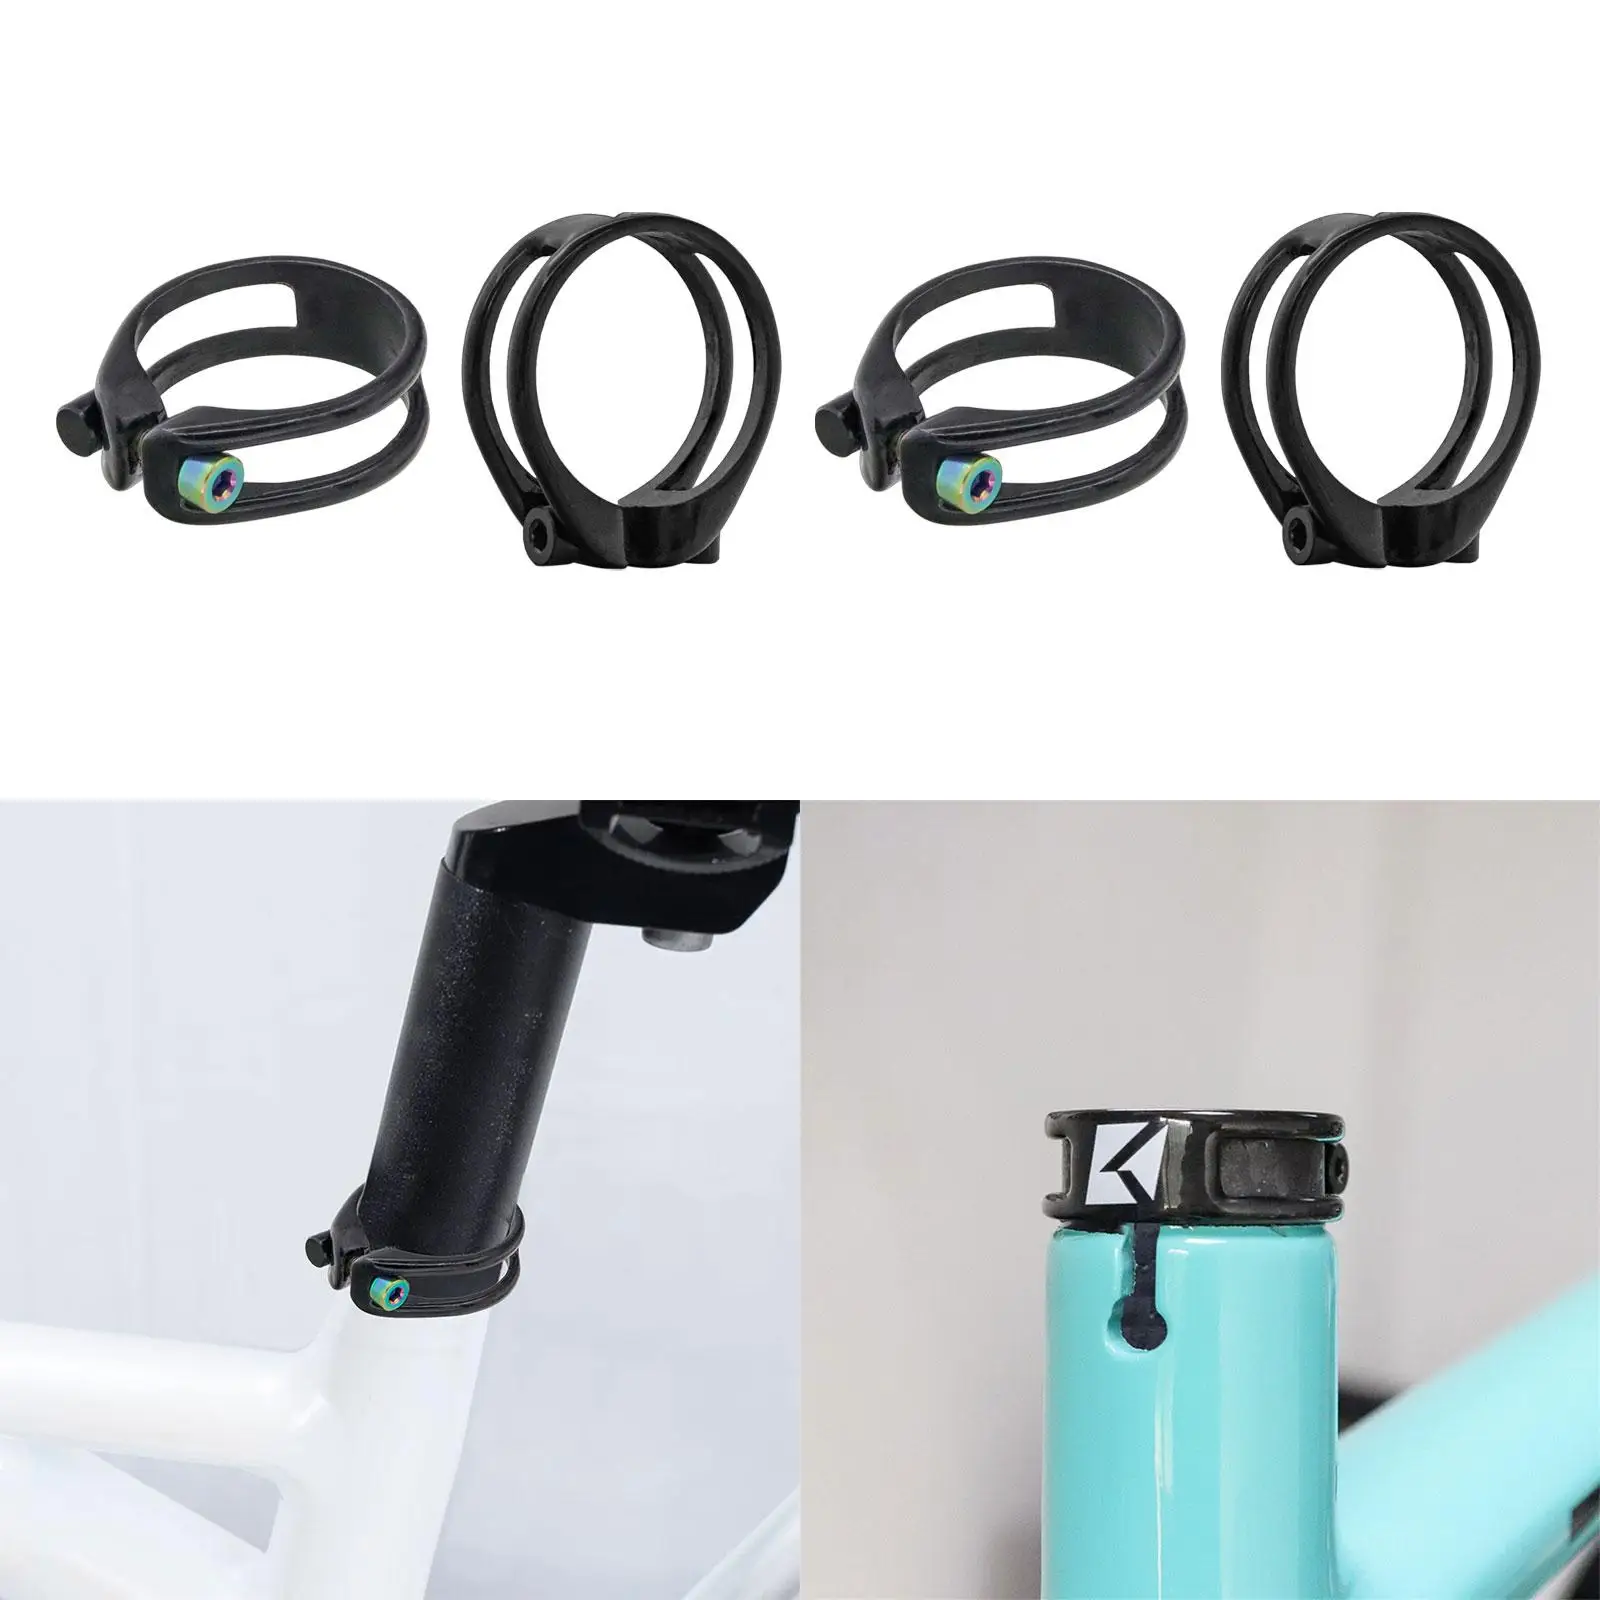 Bike Seatpost Clamp Spare Part Replacement Collar Tube Clip for Biking Folding